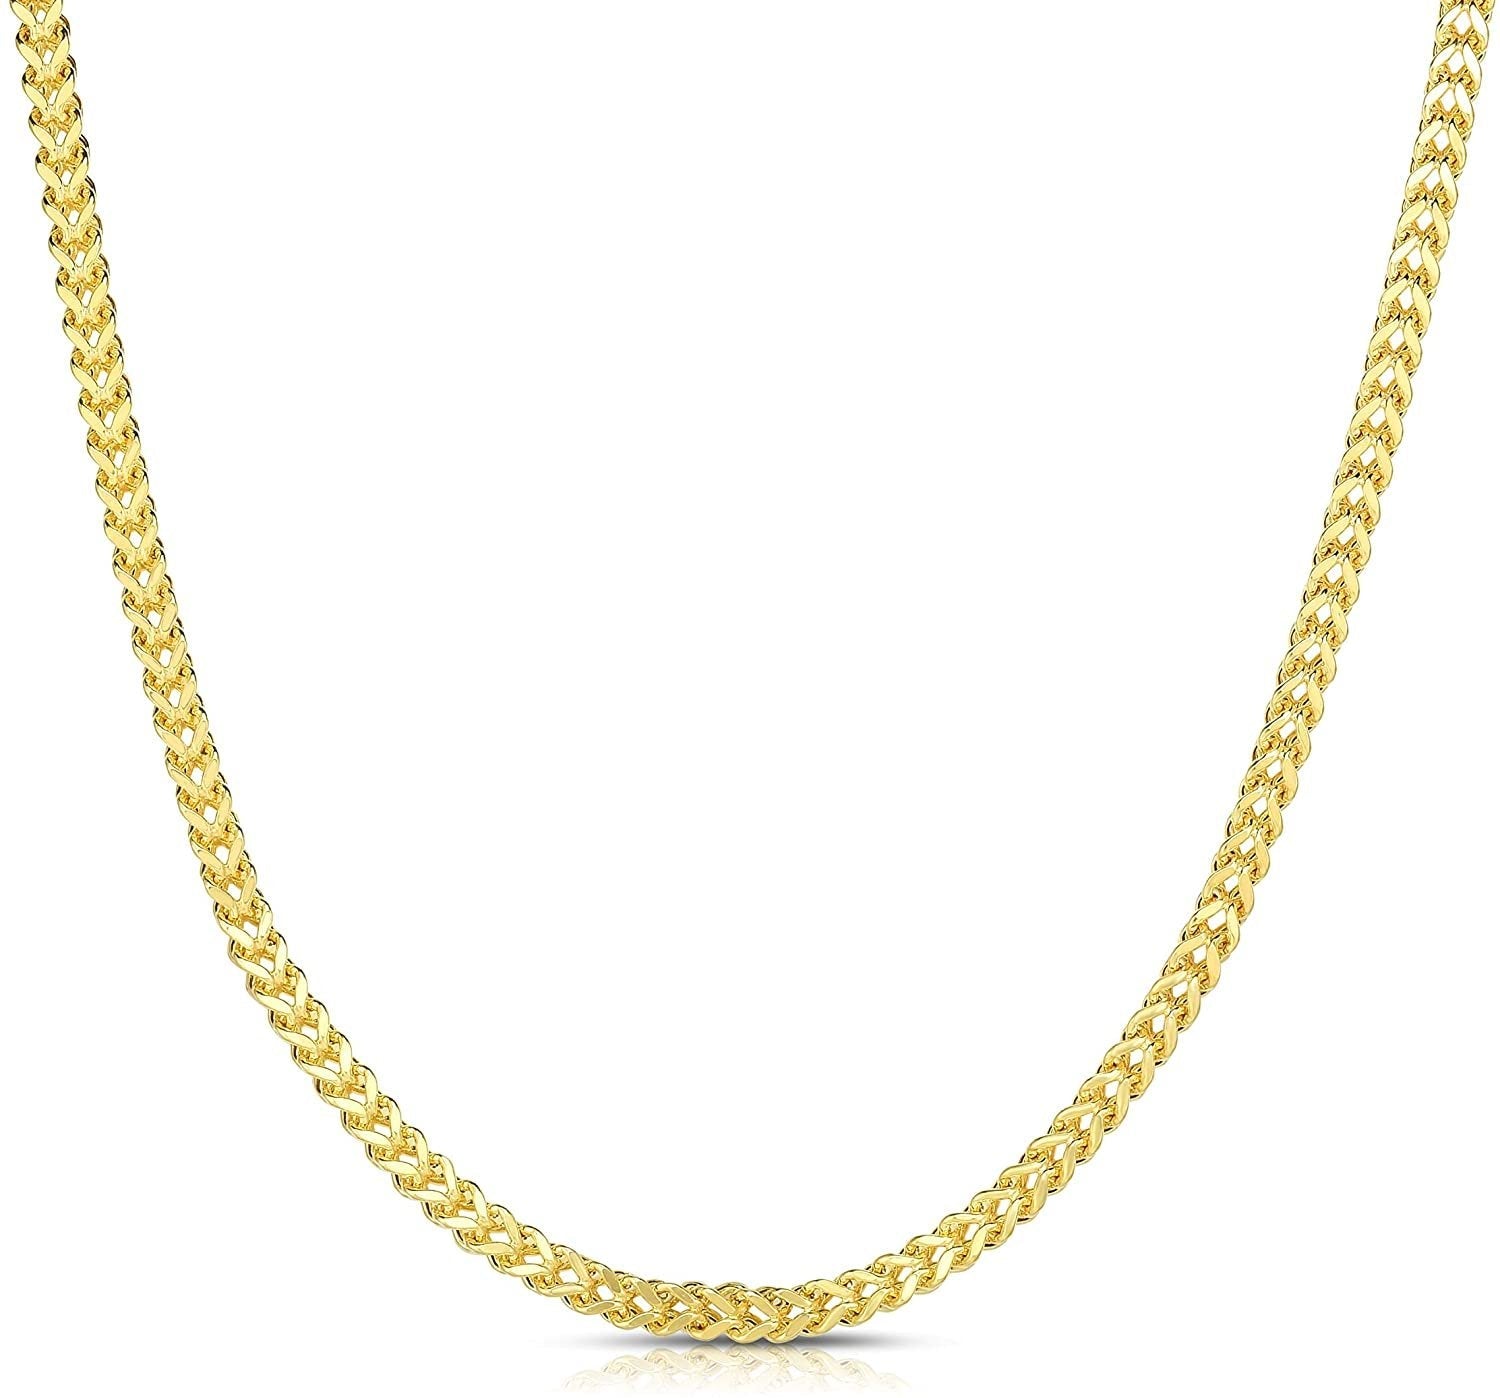 Floreo 10k Yellow Gold 4.5mm Lightweight Franco Chain Necklace, 18 Inch